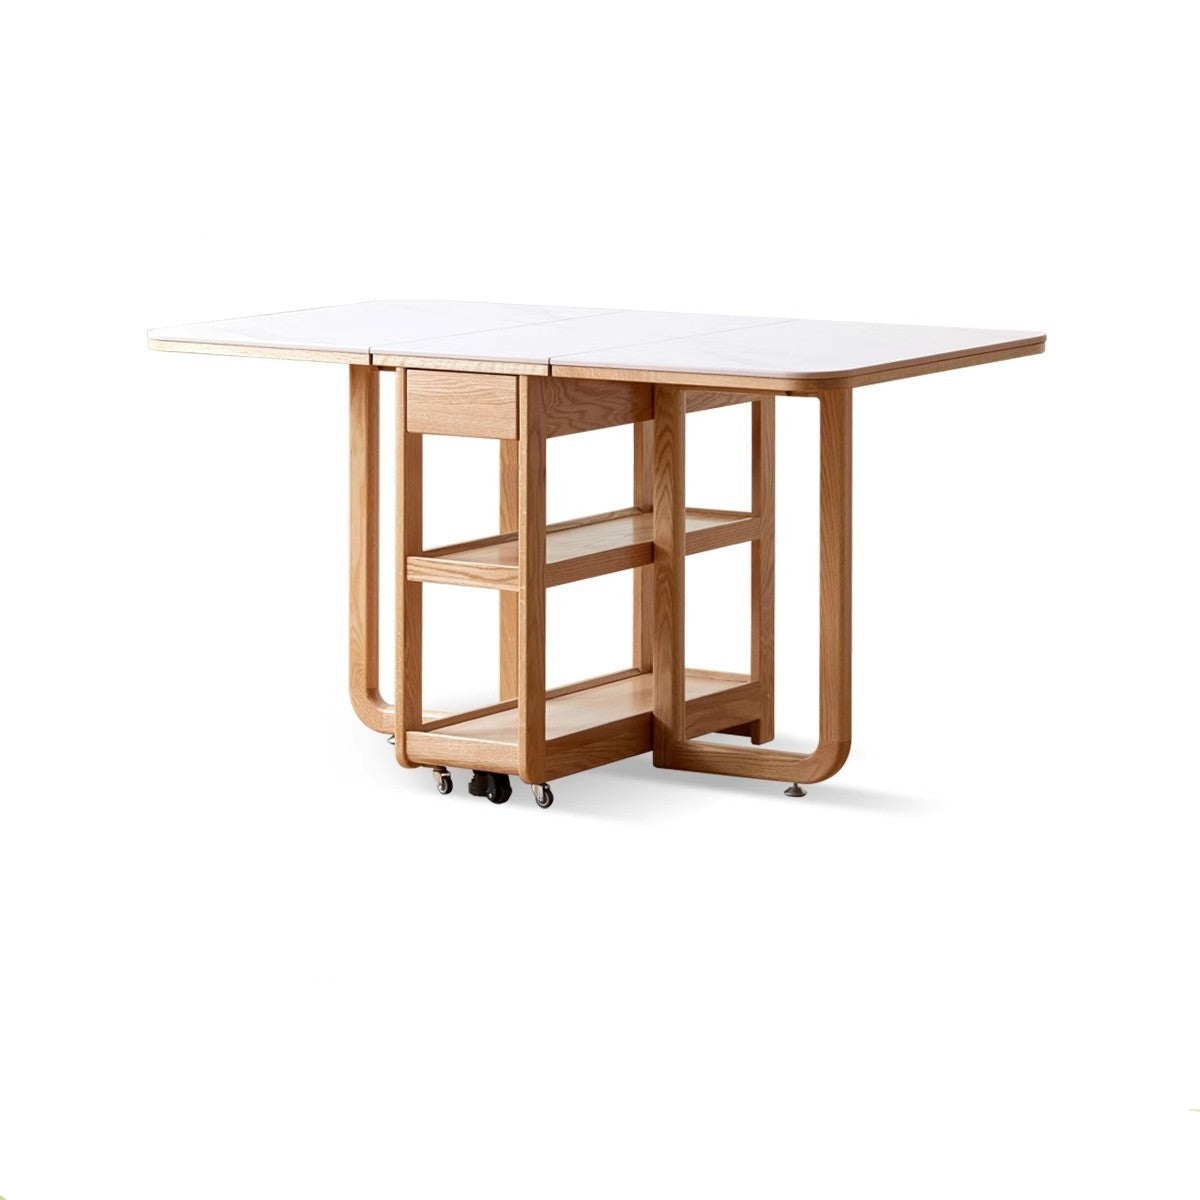 Oak Solid wood folding multi-functional storage telescopic dining table"